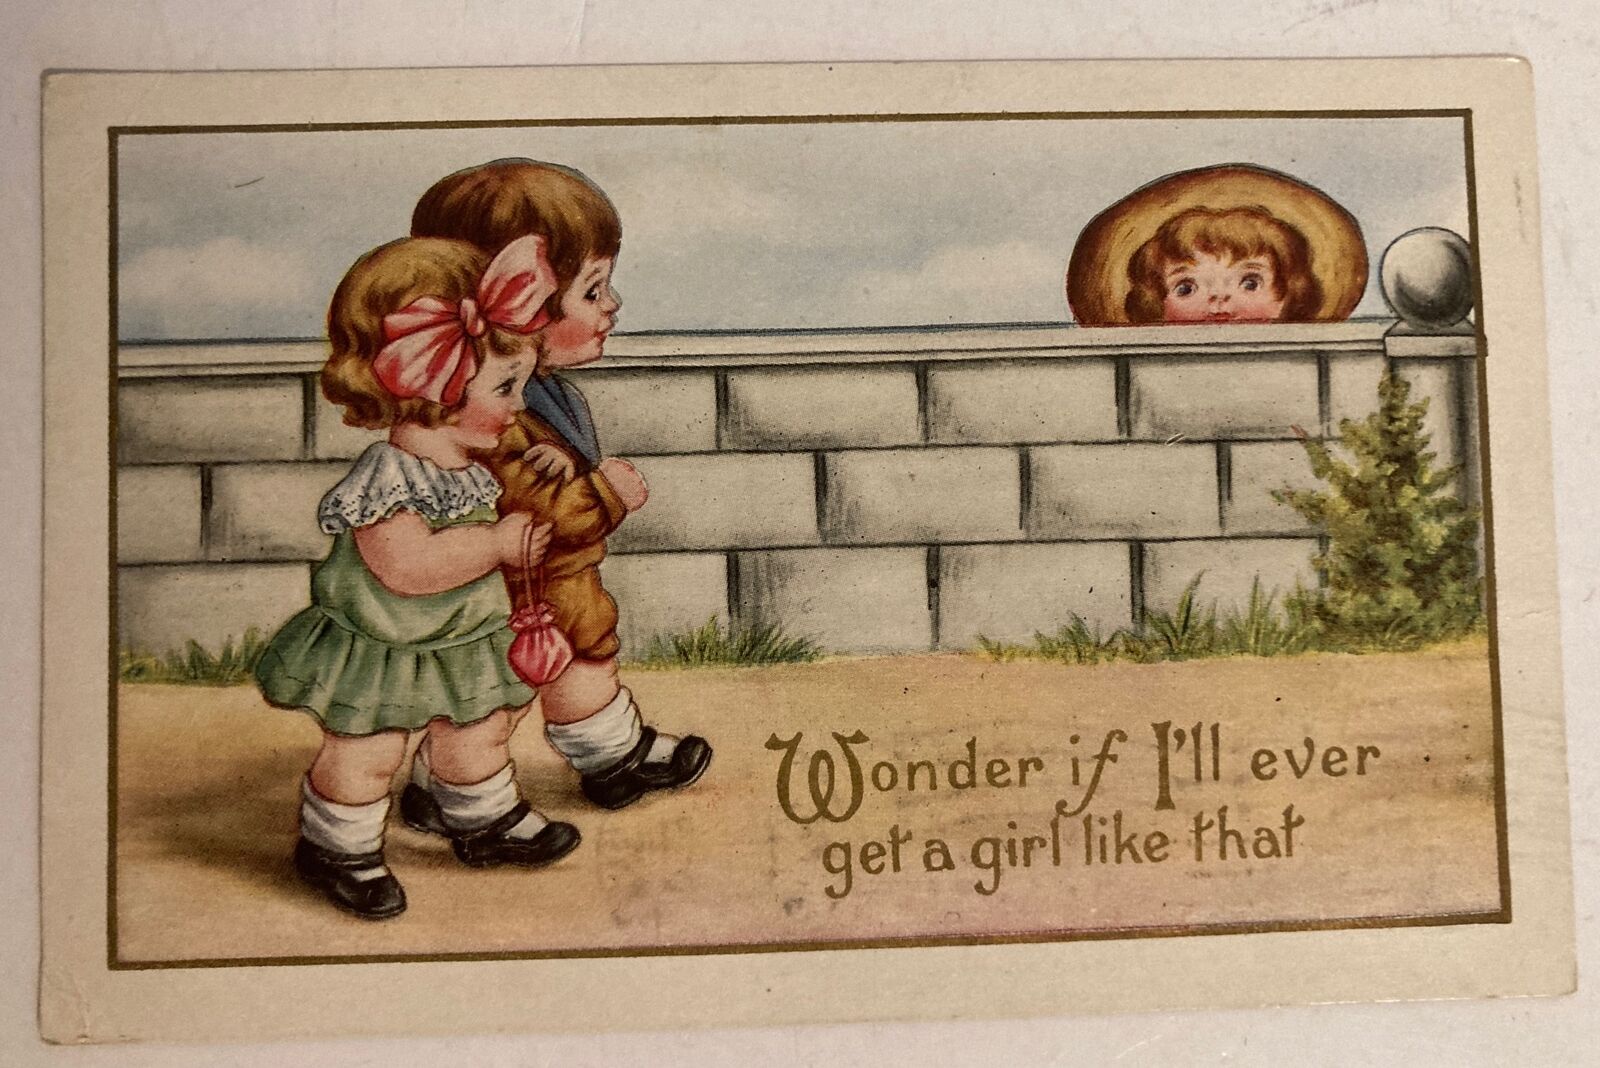 1917 Wonder If I\'ll Ever Get A Girl Like That~Whitney Worcester PM Postcard